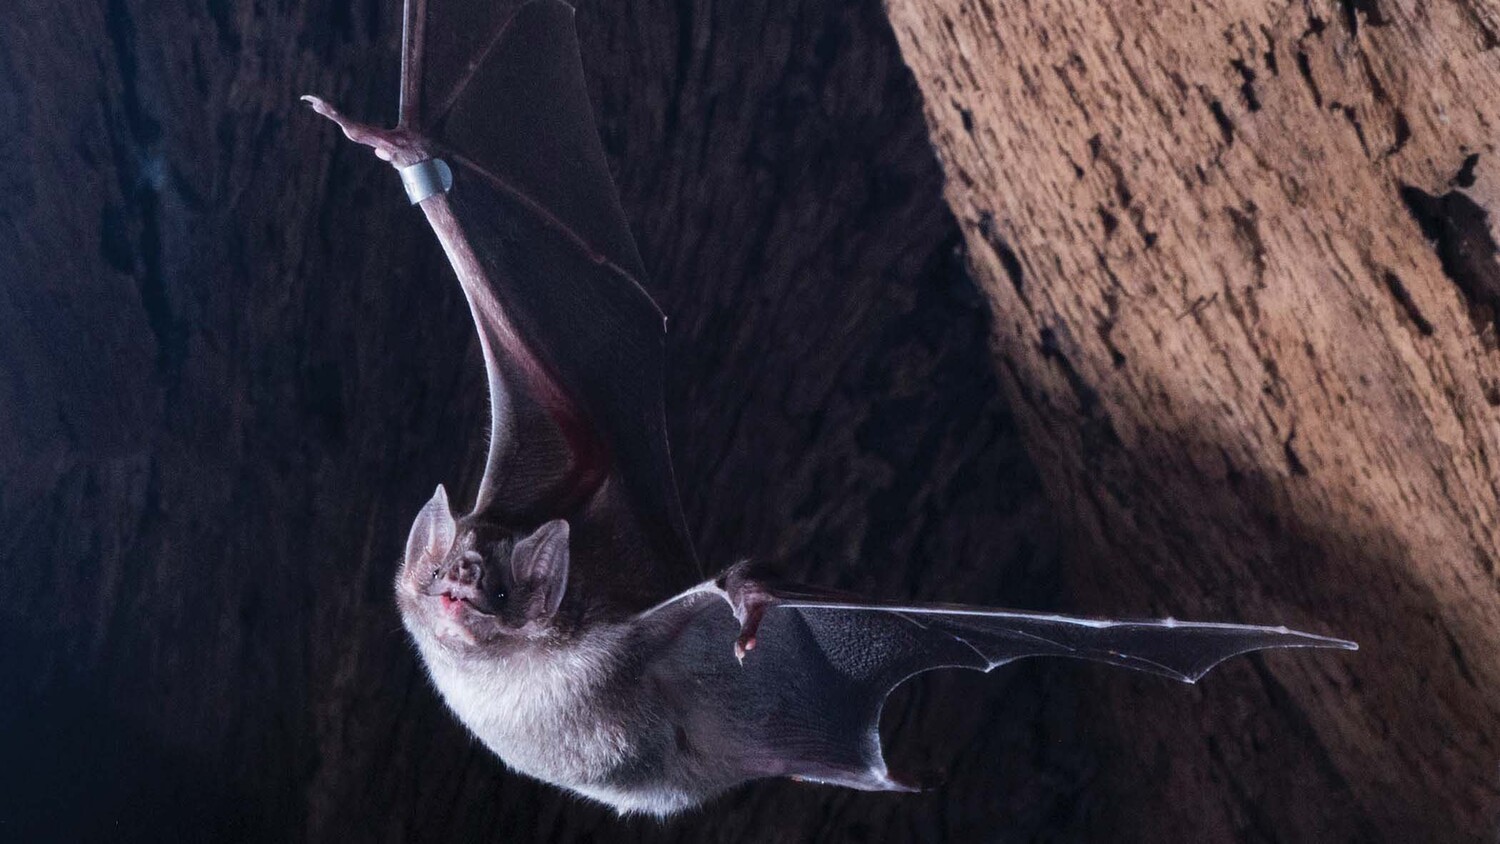 How can scientists identify bats that are prone to carrying diseases like SARS?